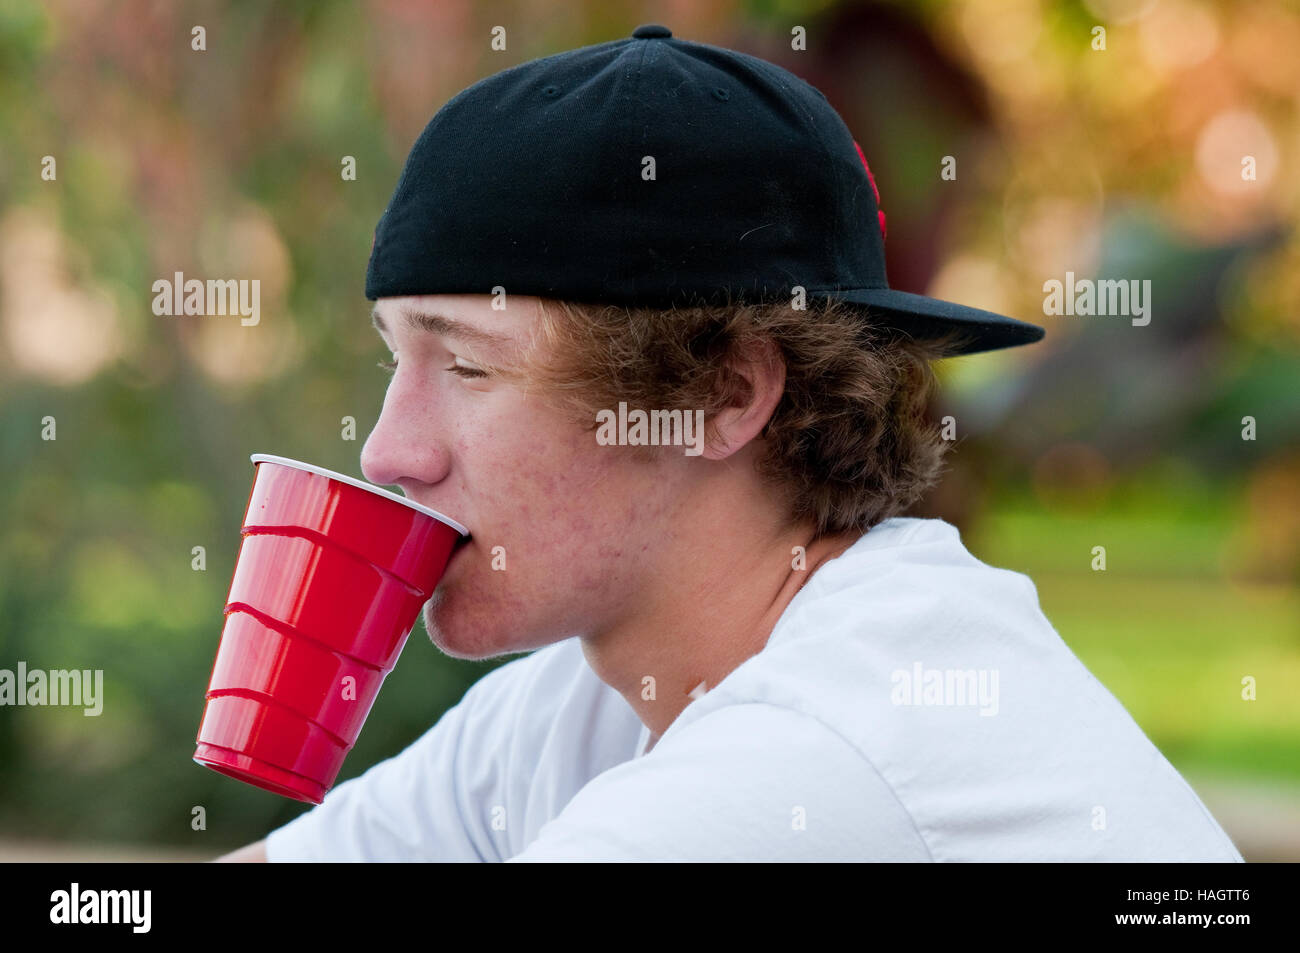 Teen boy outdoors with acne looking at camera with black backwards hat and white shirt. Stock Photo